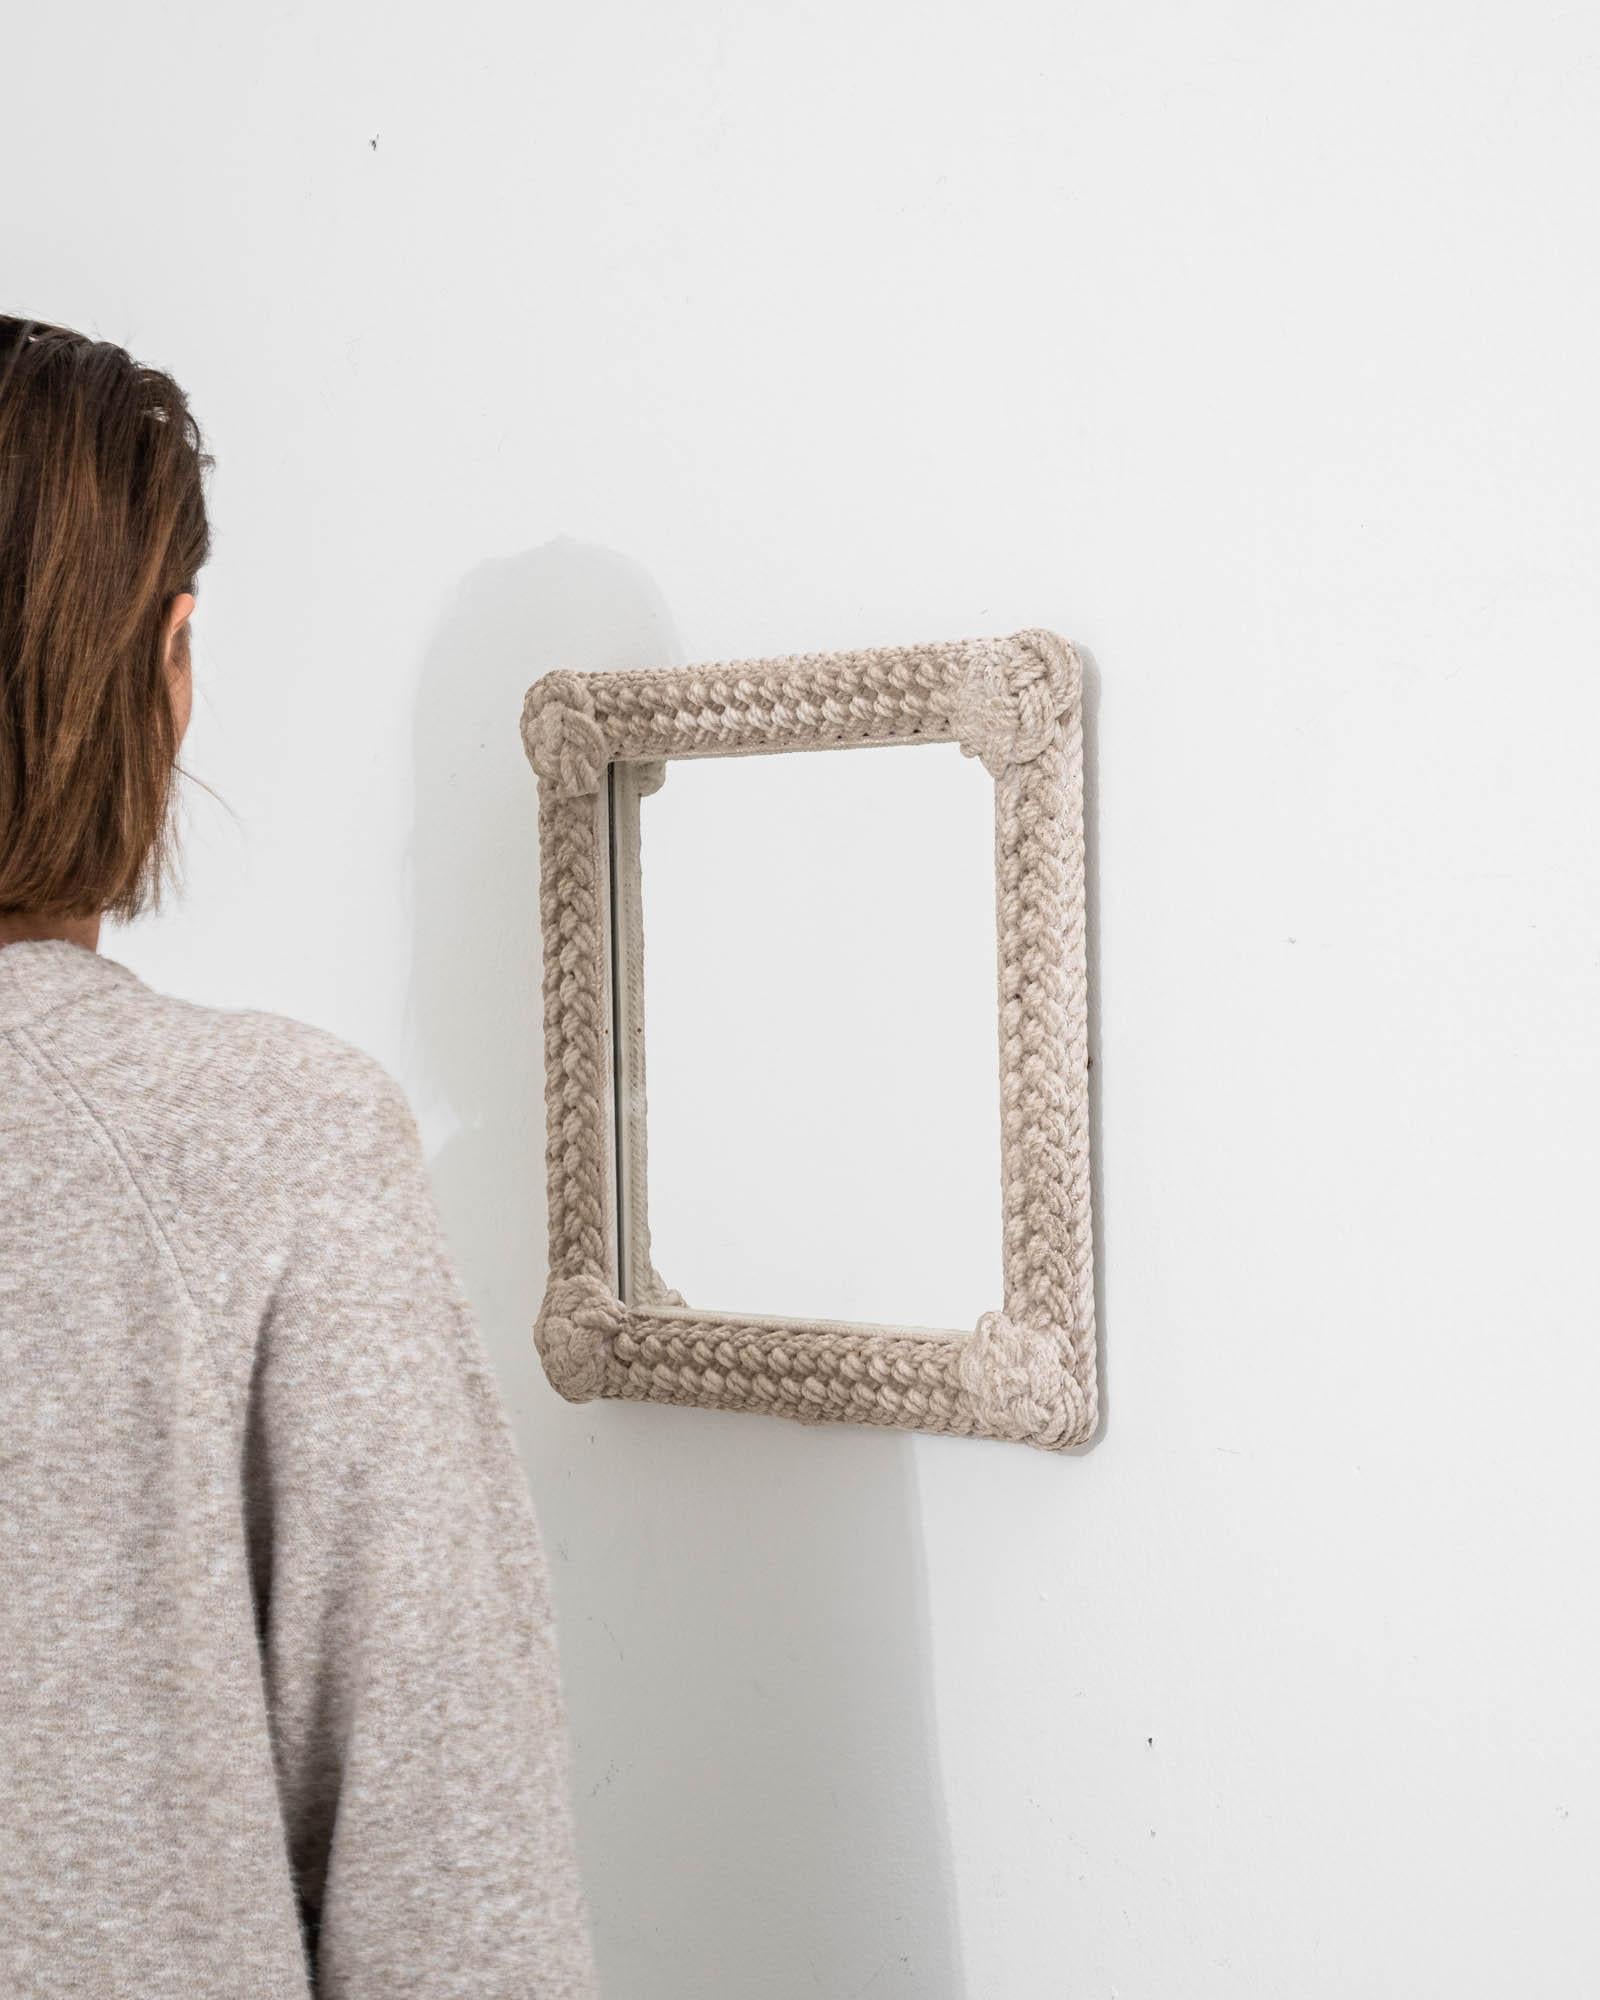 A wooden mirror created in 20th Century France. A truly dazzling work of art, this exquisite mirror exudes a sense of humble regality, articulated effortlessly with a unique motif. The frame of this mirror has been rendered as knotted rope, which